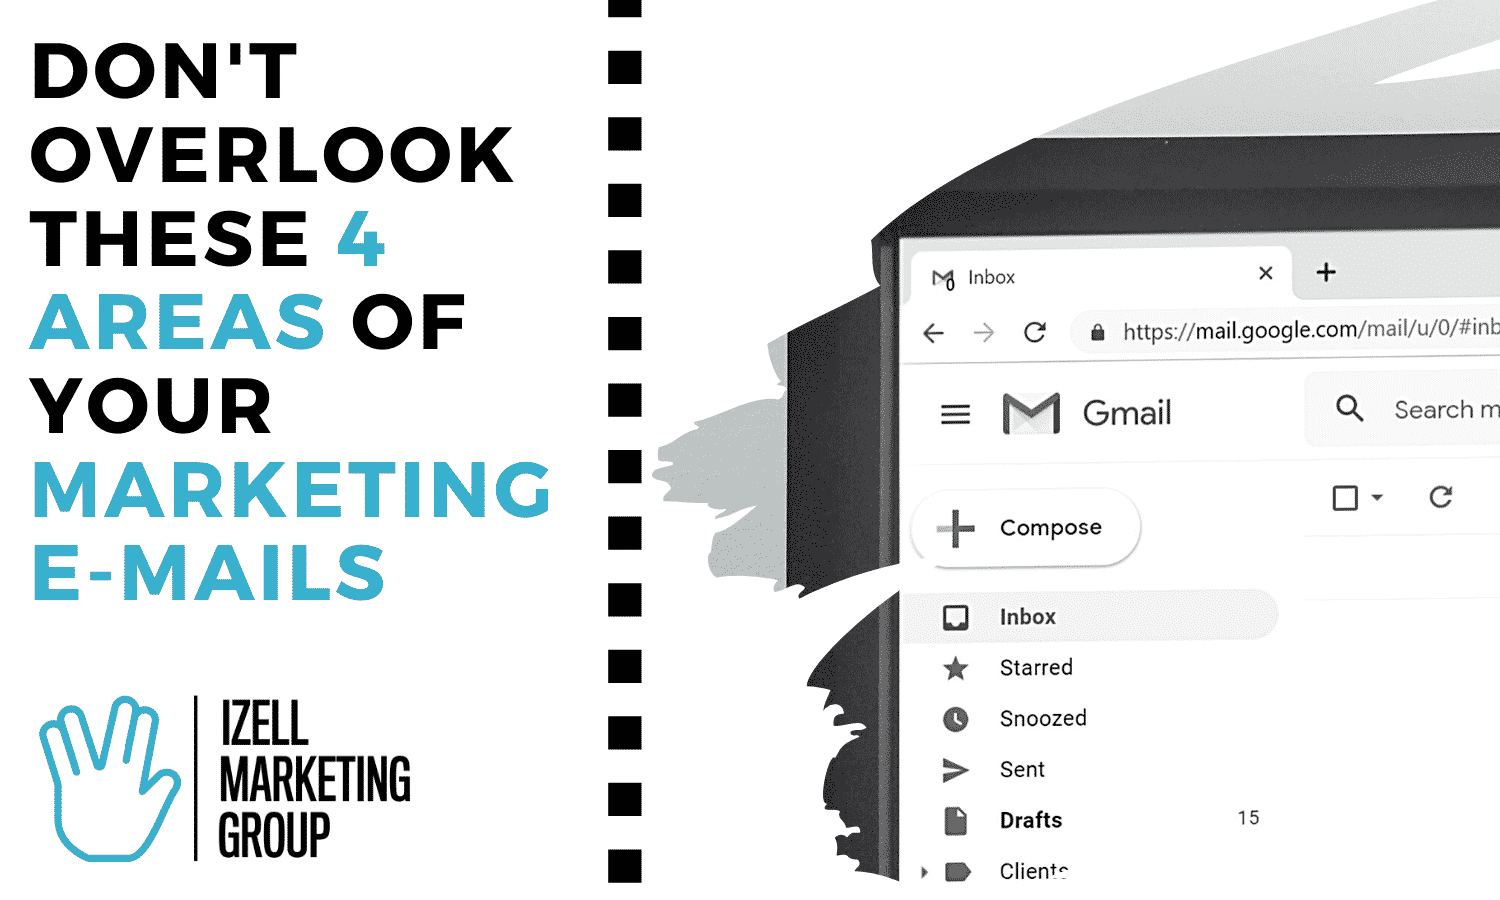 Don't Overlook These 4 Areas of Your Marketing E-Mails